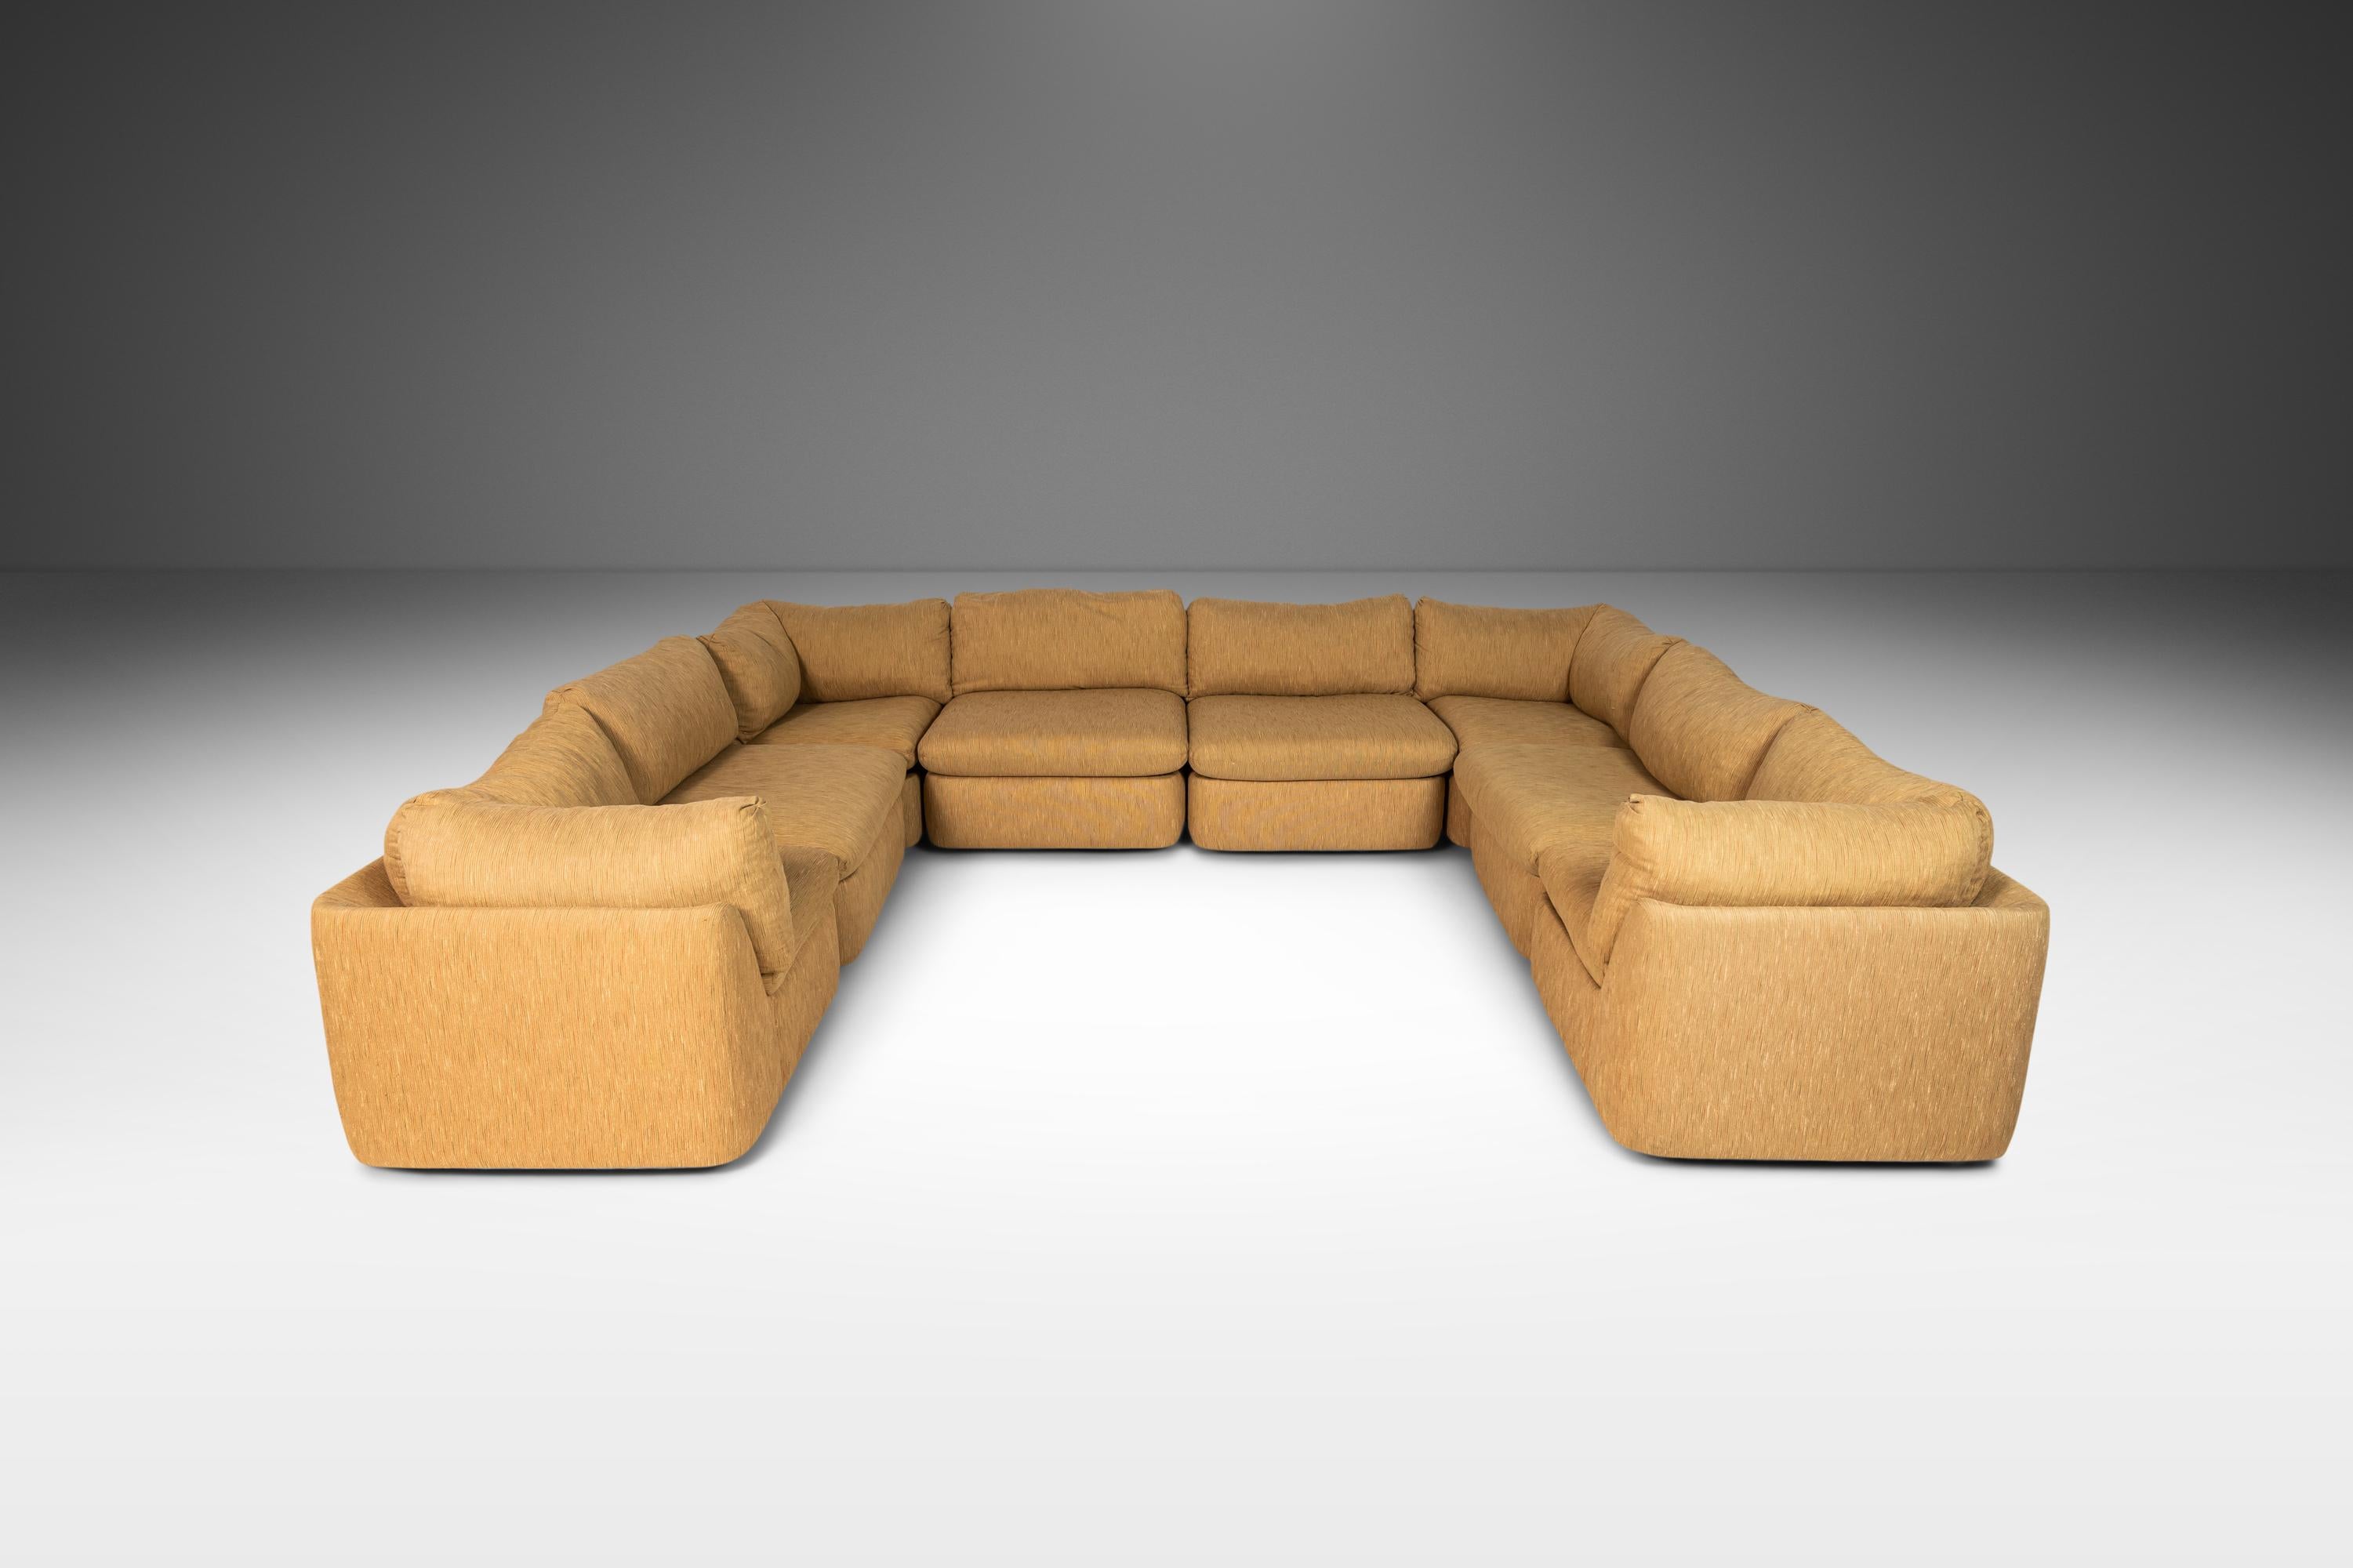 Consisting of eight pieces (four corner pieces and four side pieces) this expansive sectional sofa is as comfortable as it is grand in scope. Able to be arranged in an almost limitless amount of positions and shapes this sofa is ideal for those